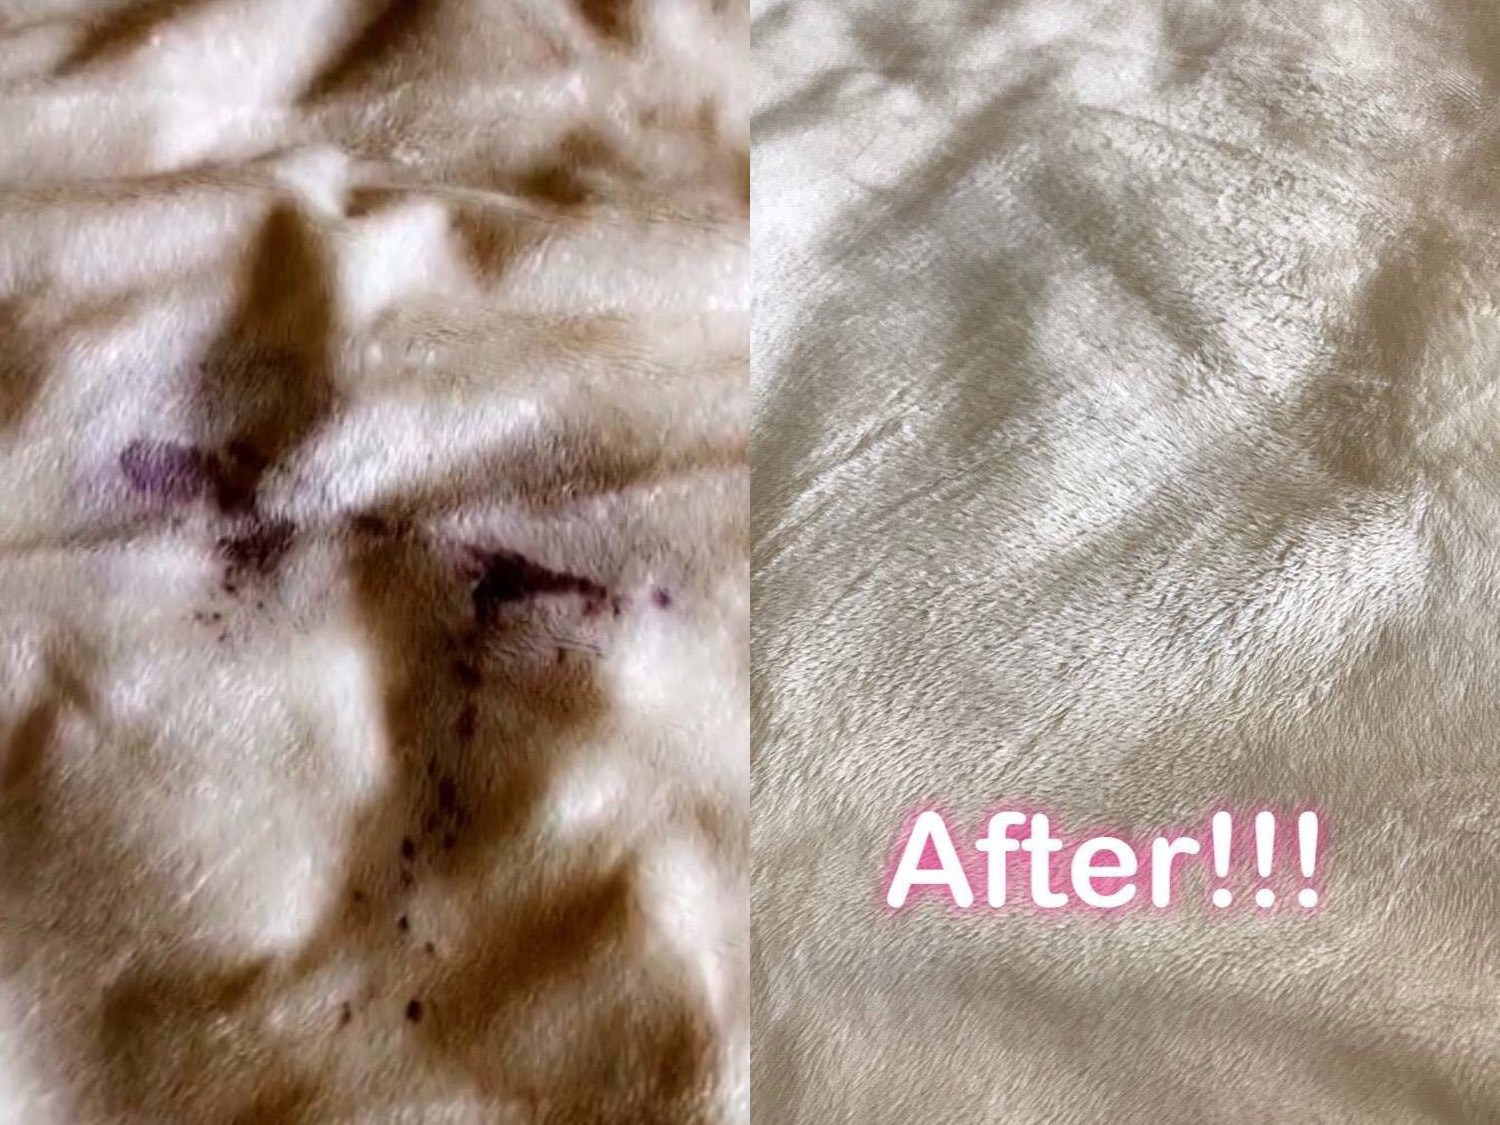 Reviewer photo of a white blanket before and after being treated with the stain remover. The before photo shows a large wine stain and the after photo shows the stain completely removed